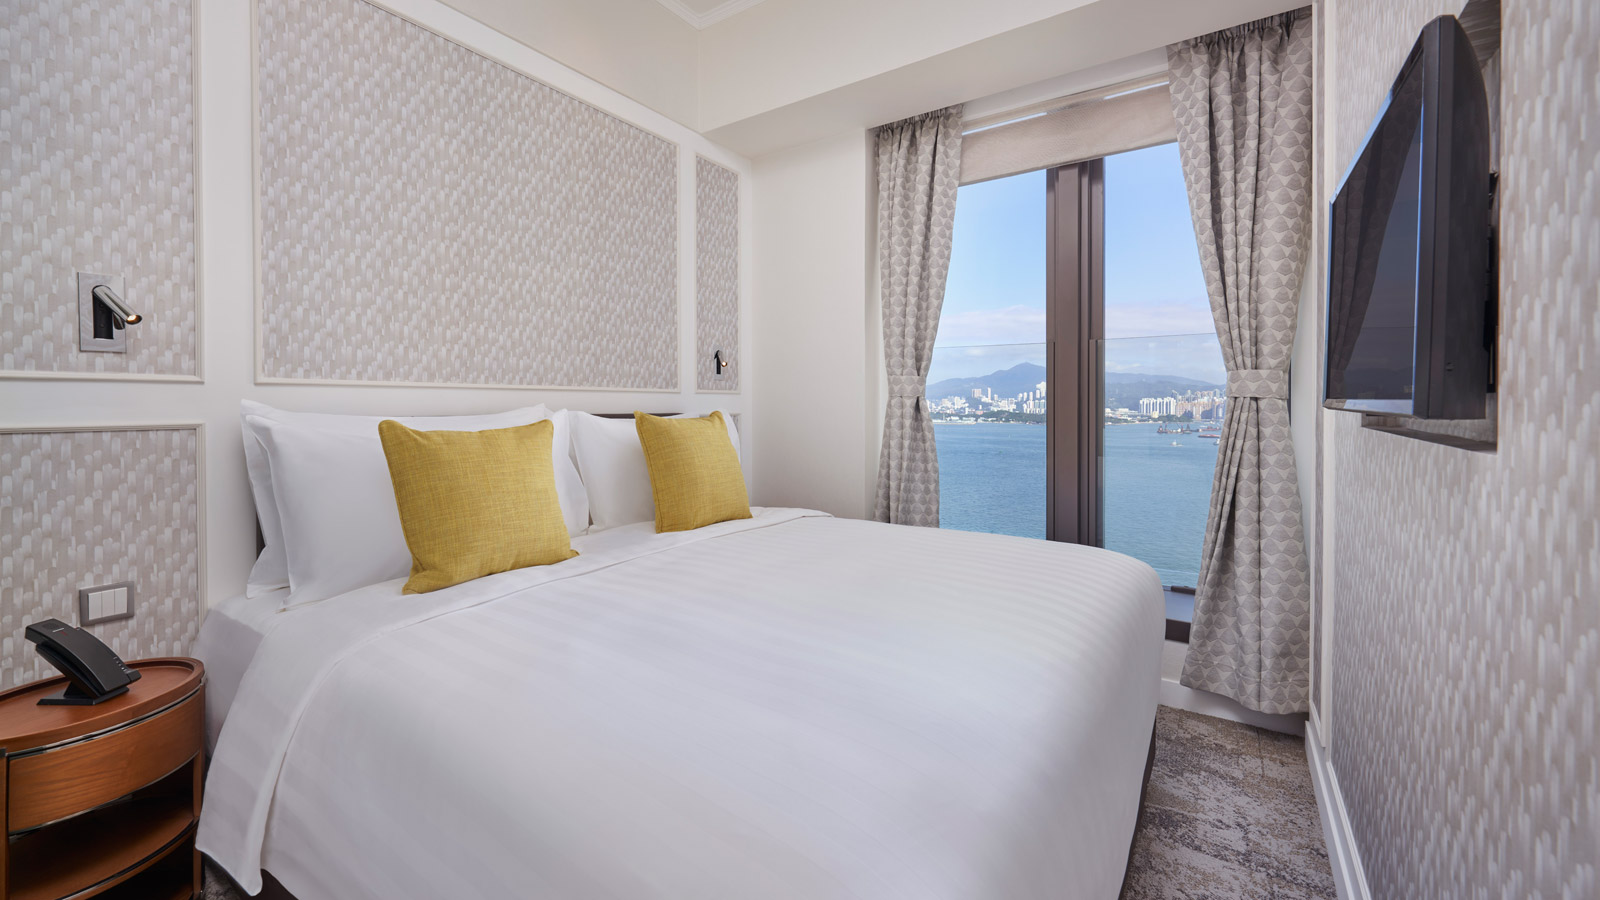 One Bedroom Harbour Suite - Y Hotel Hong Kong (Images are a visual preview and may vary) - Y Hotel Hong Kong